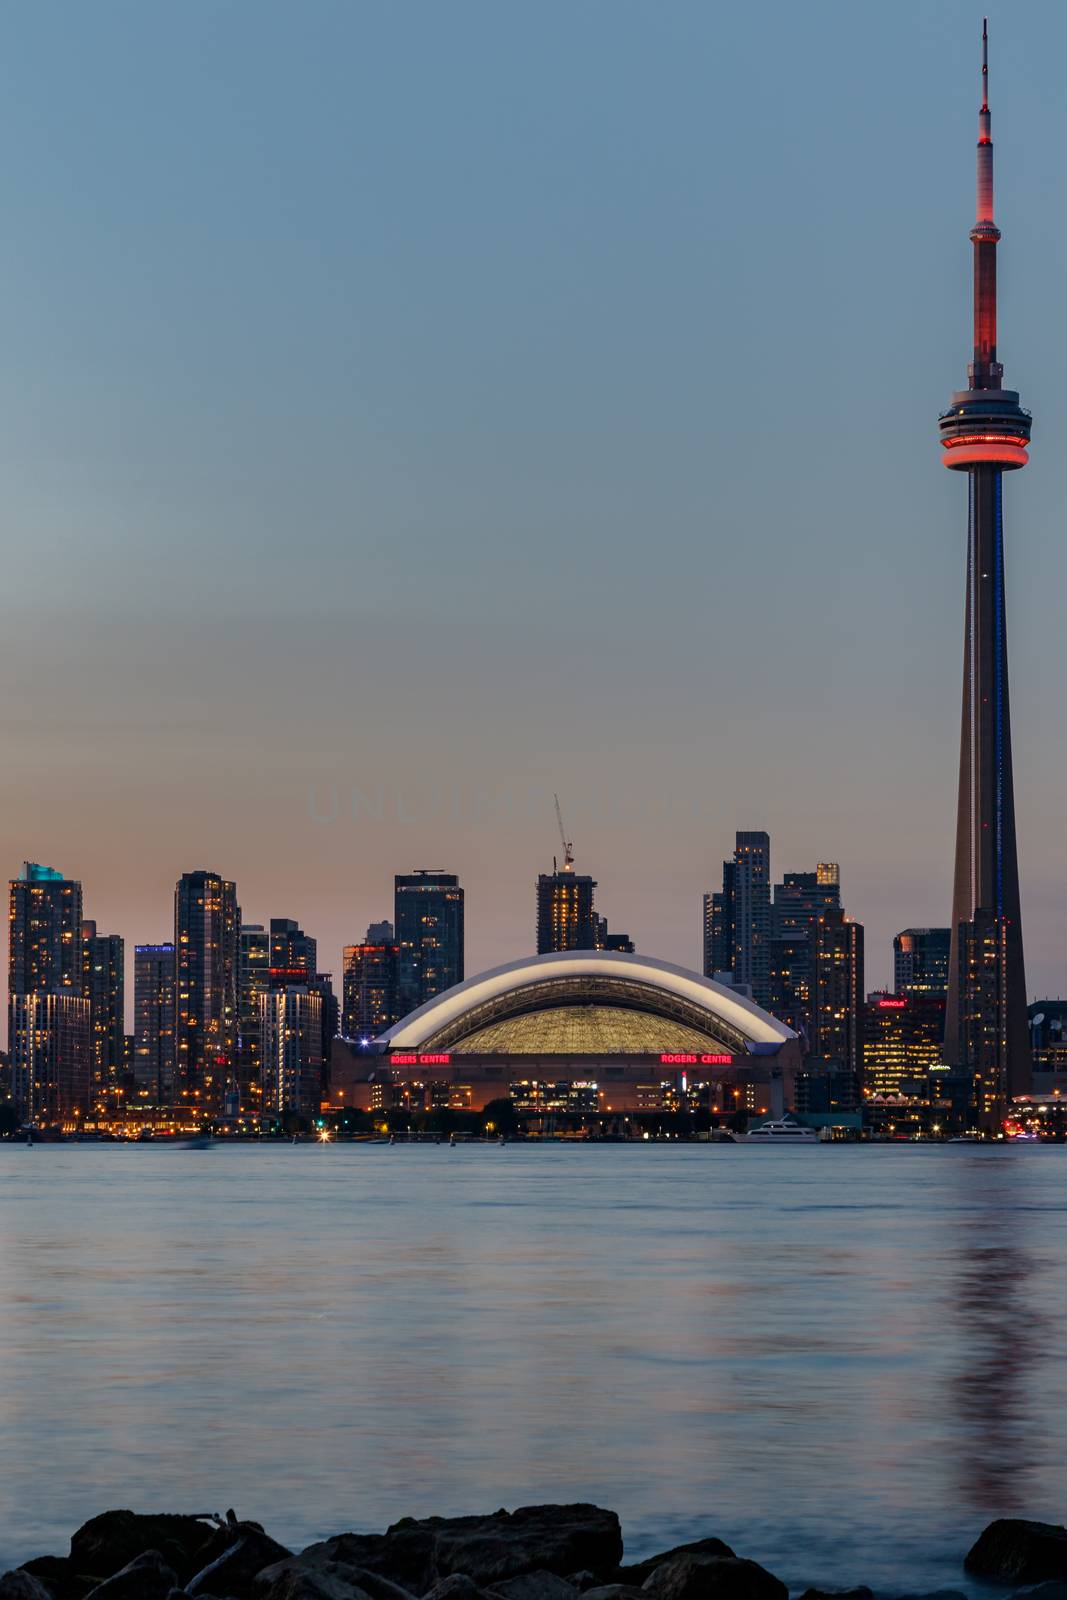 Night View of Downtown Toronto from Toronto Islands with the Lake Ontario, Canada.